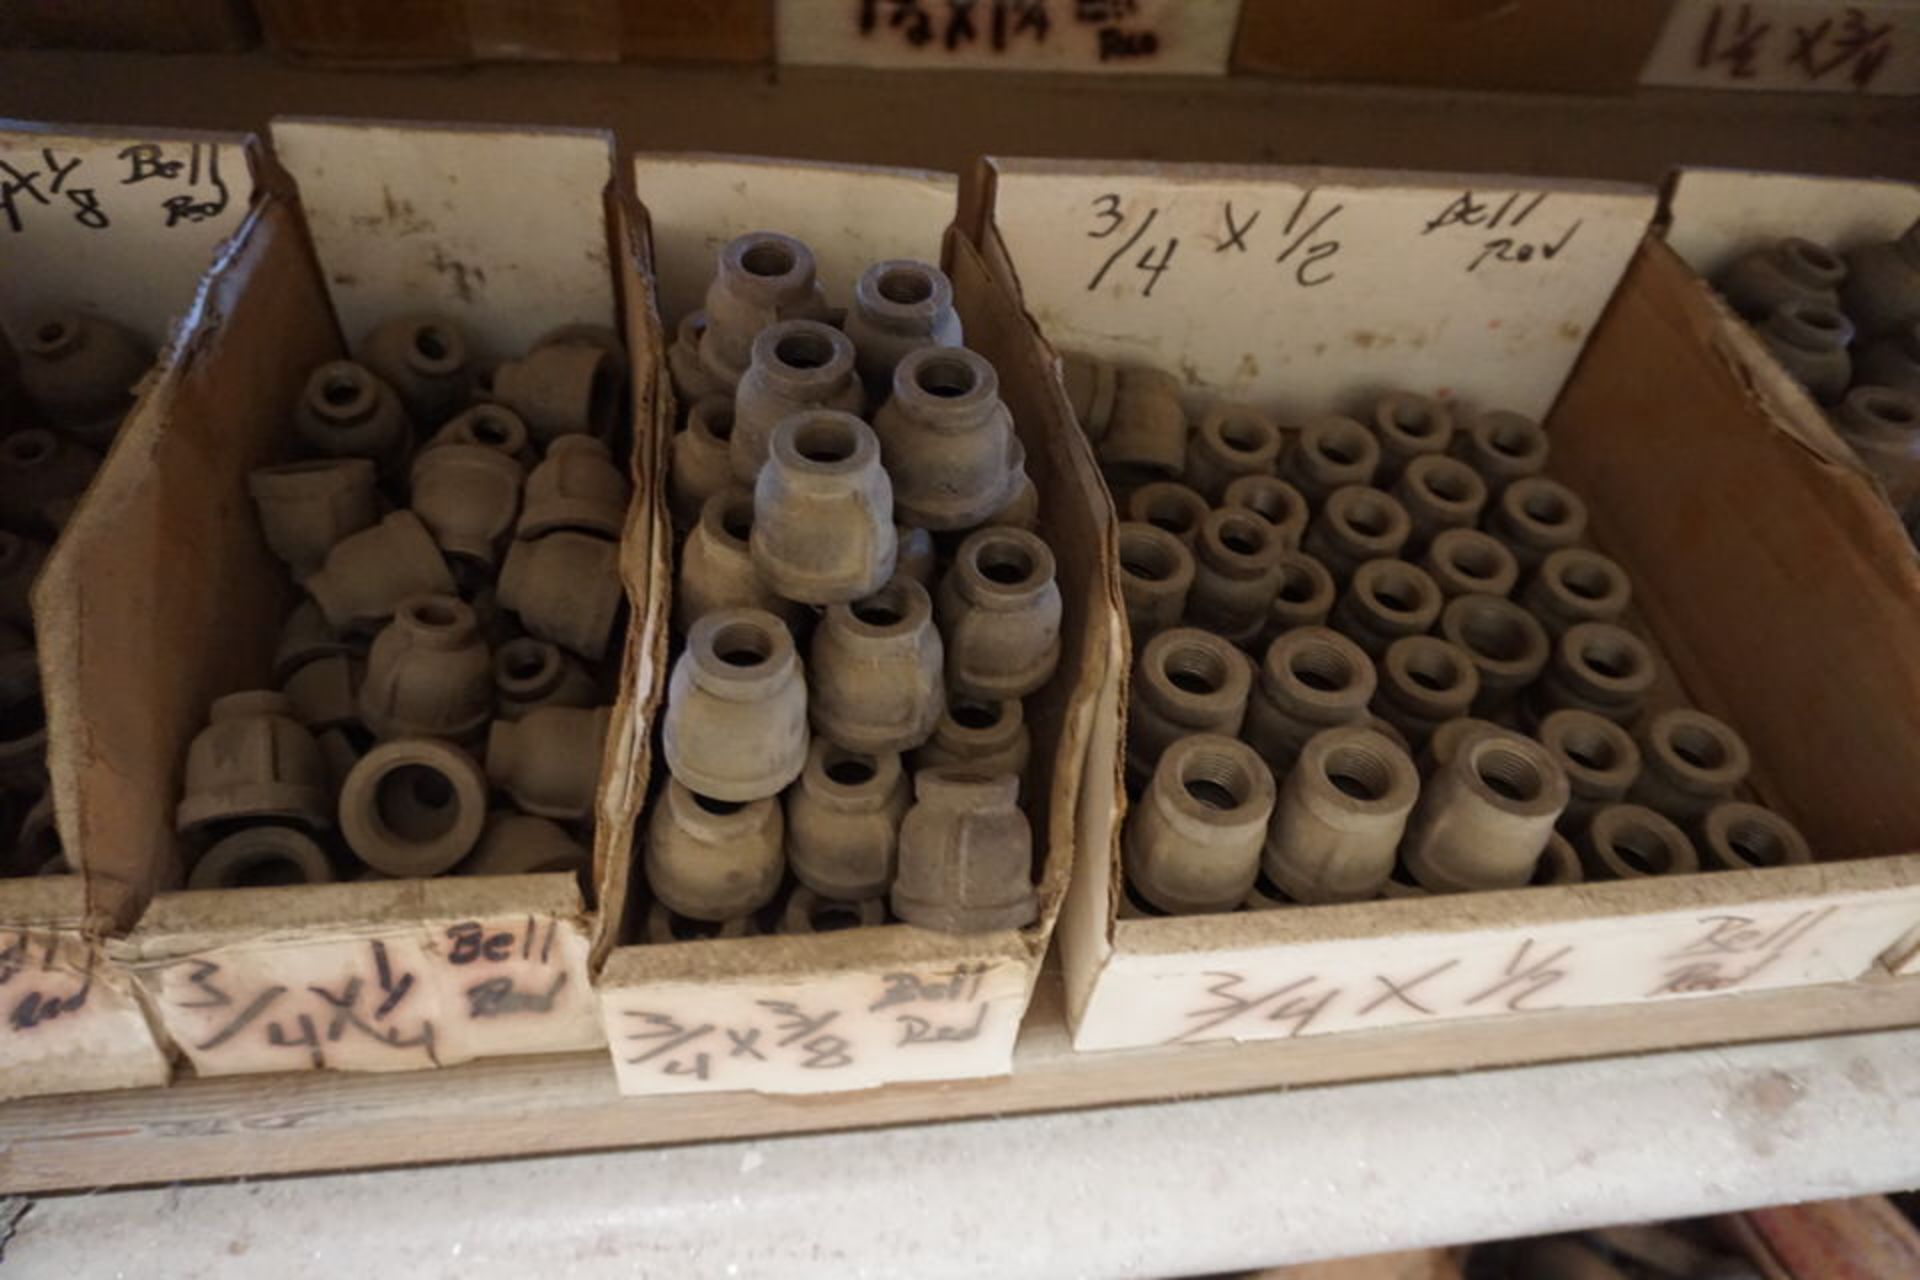 CONT OF SHELF: ASSORT SIZE PIPE NIPPLES, L'S, BELL RODS, REDUCERS, RANGE 1/8" TO 3" APPROX 400 PCS - Image 8 of 16